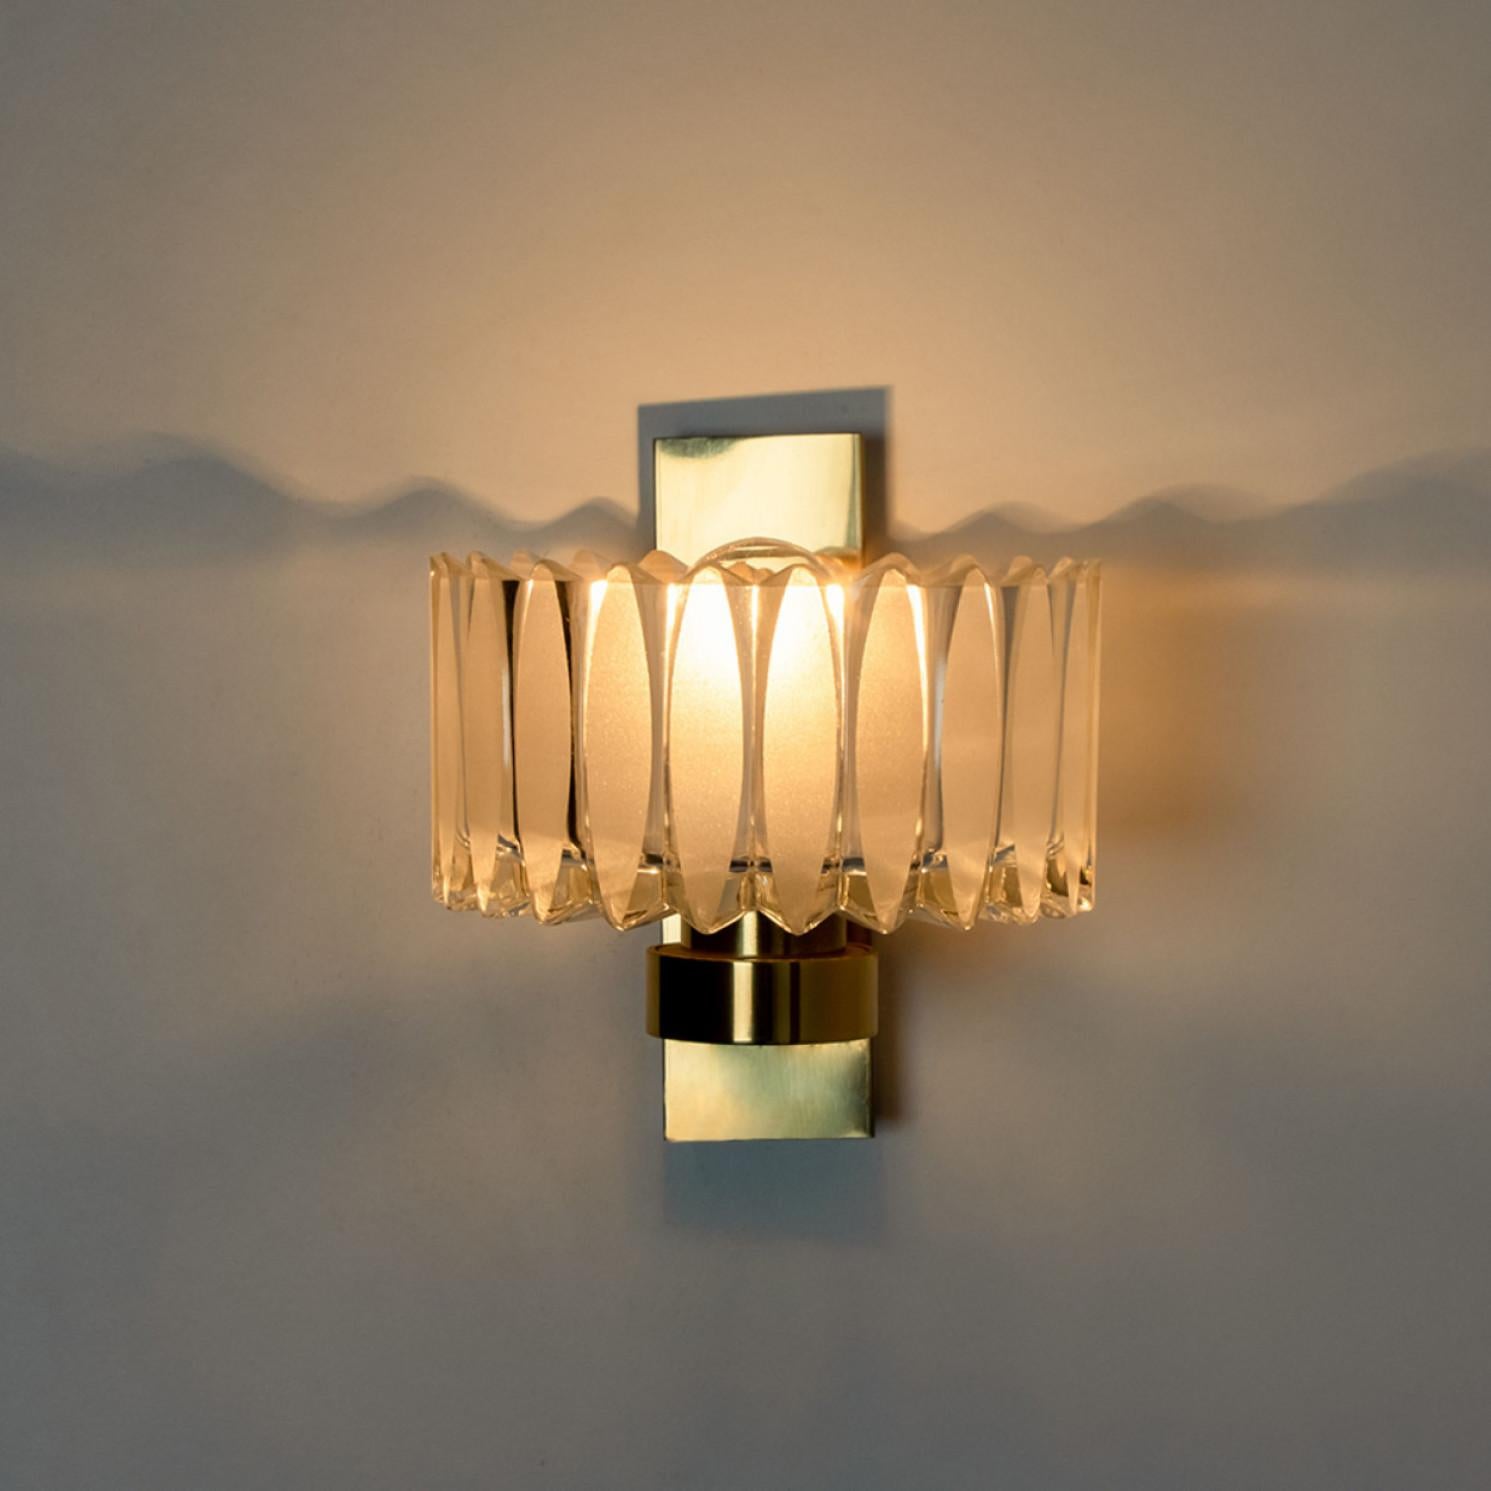 German 1 of the 2 Sets Hillebrand Brass and Glass Wall Light Fixtures, 1970s For Sale